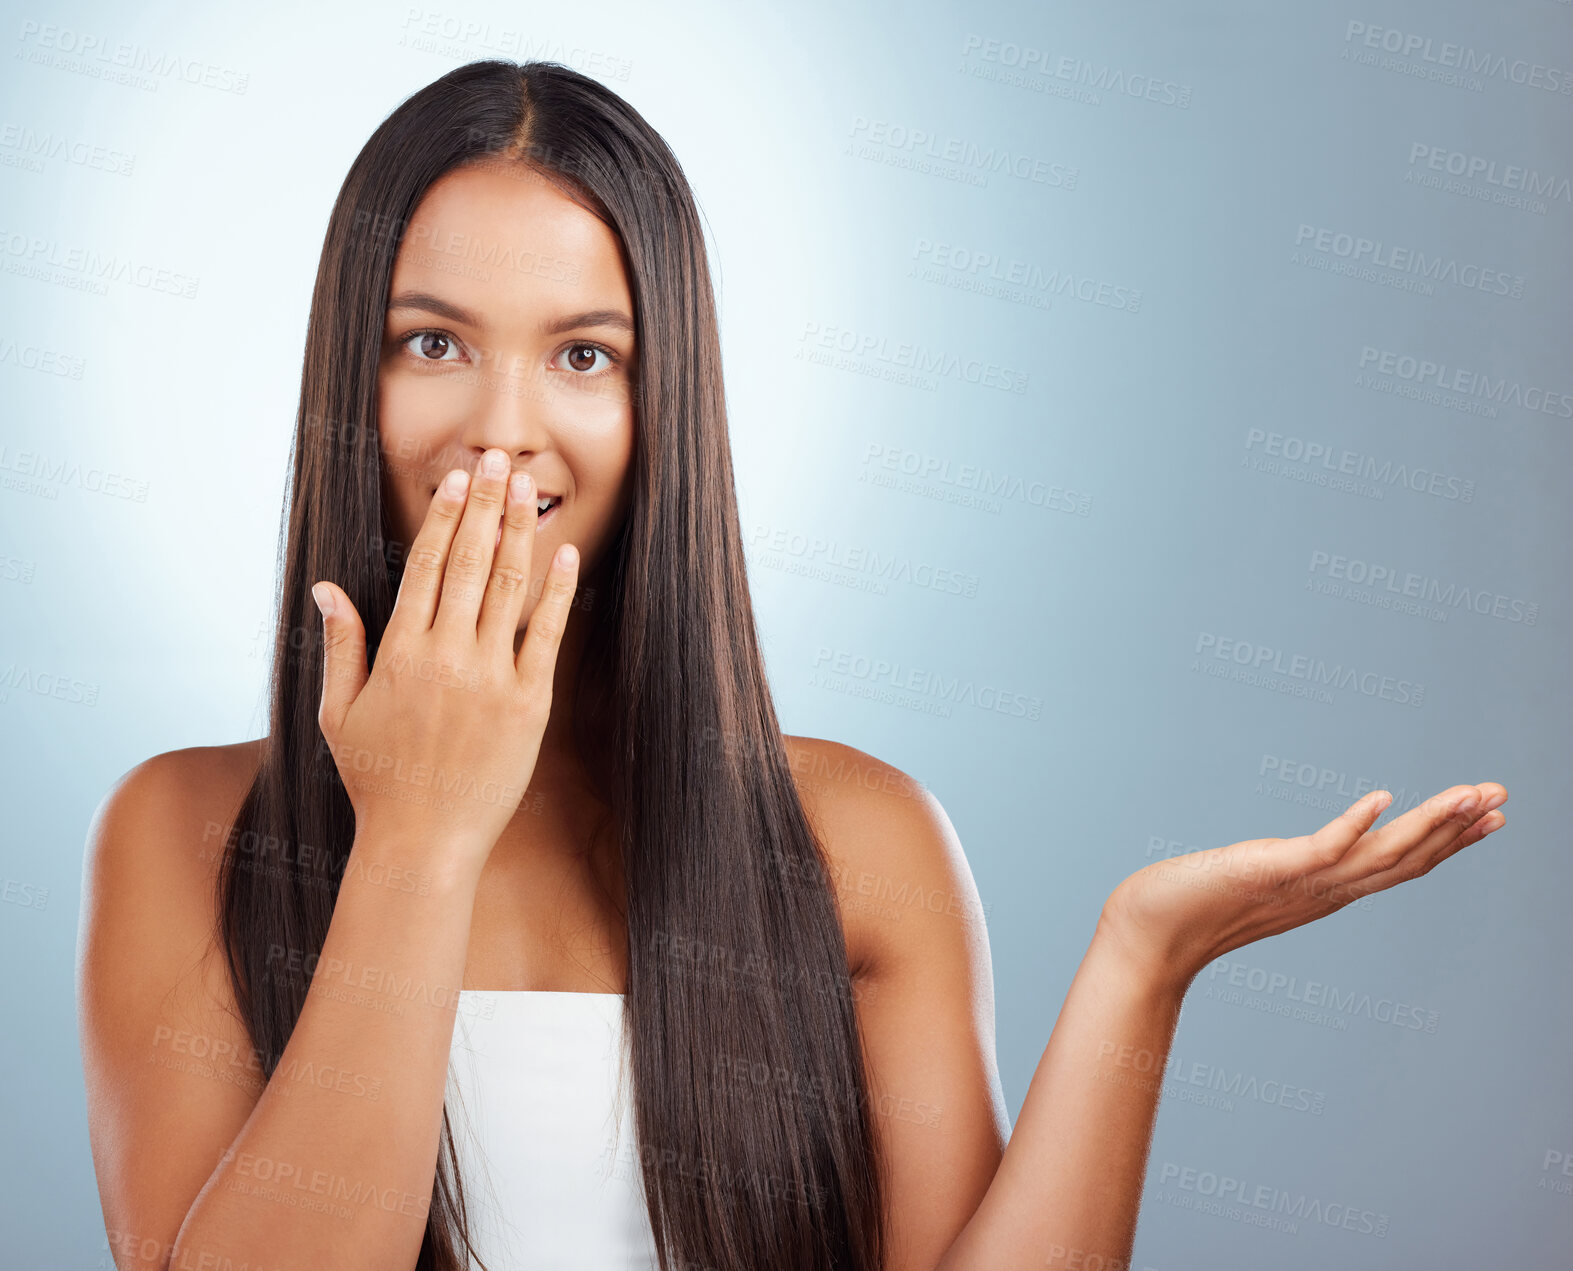 Buy stock photo Portrait of a young mixed race beautiful woman standing looking shocked and surprised while showing a space with her hand against a grey background. Hispanic female having a ecstatic expression on her face